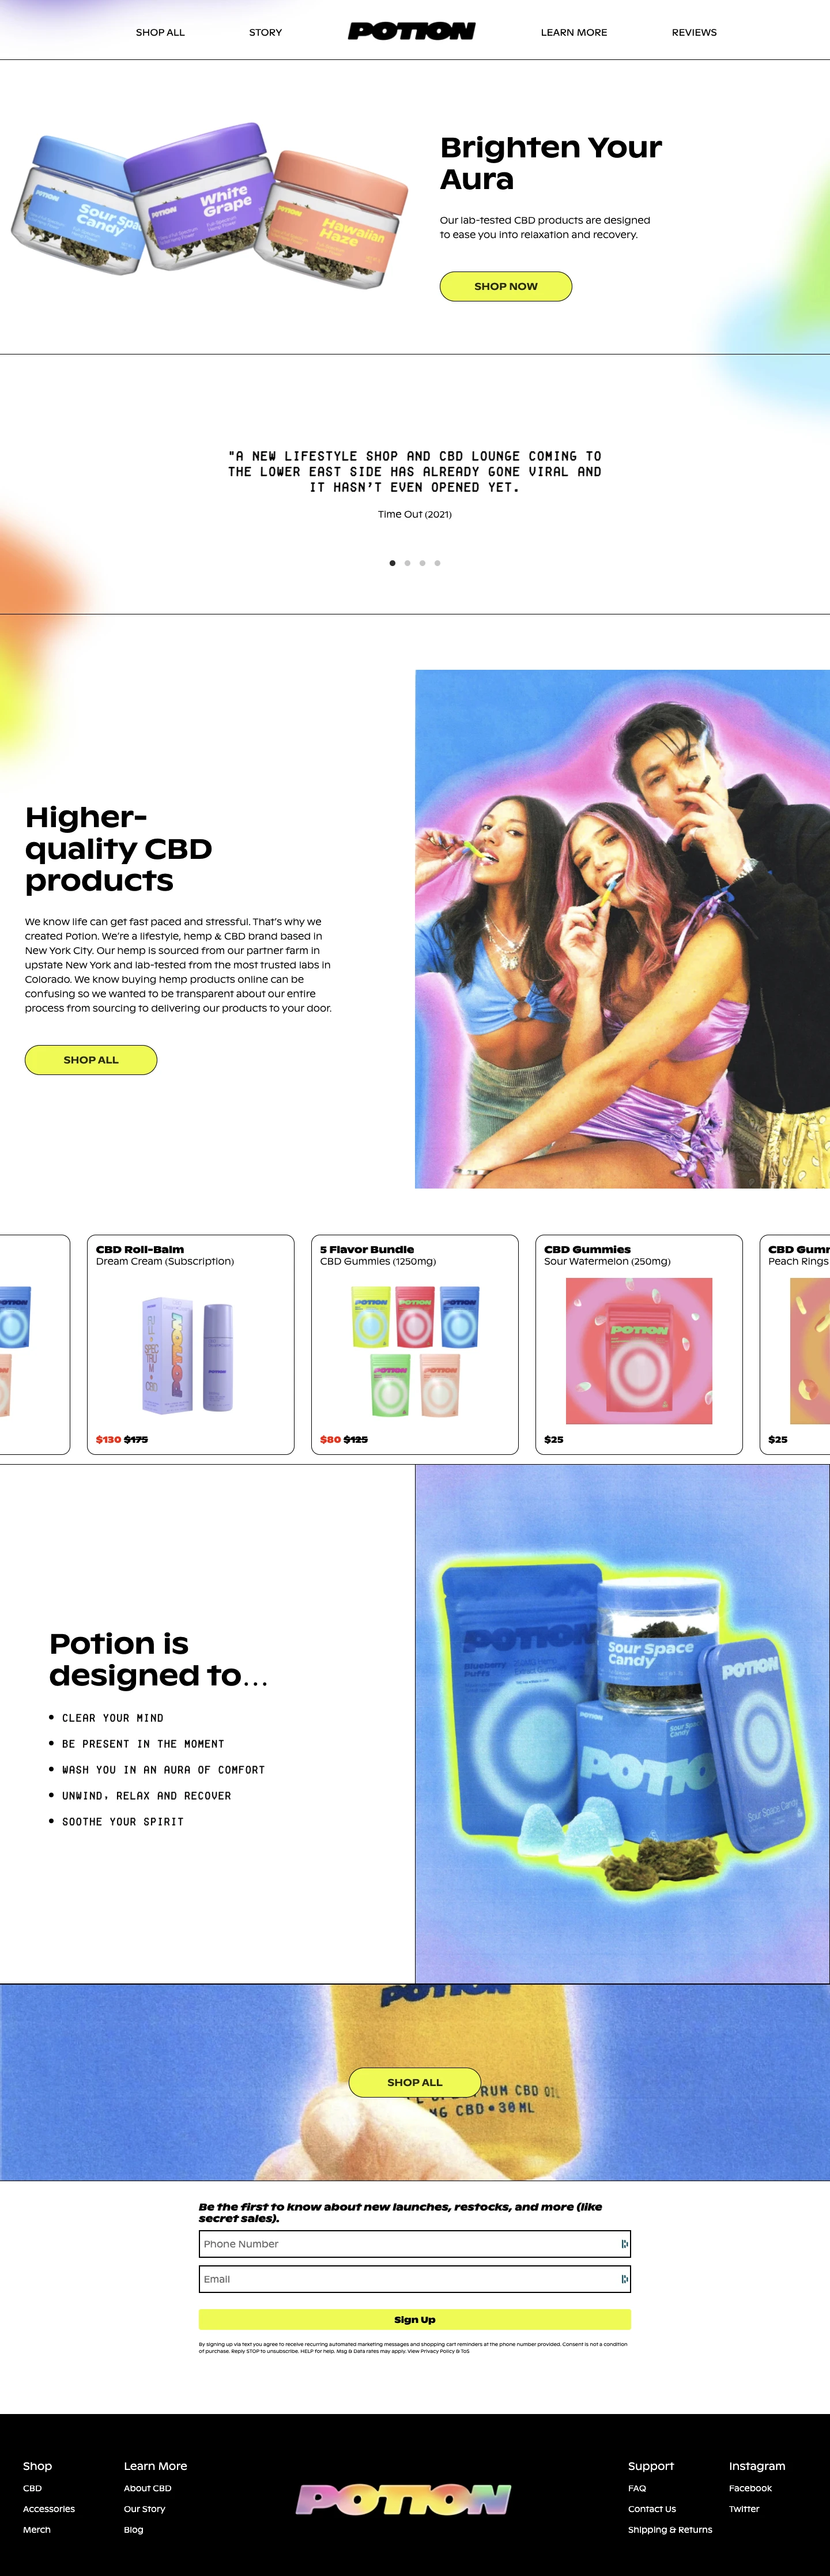 Potion Lifestyle Landing Page Example: Brighten your aura. Our lab-tested CBD products are designed to ease you into relaxation and recovery.